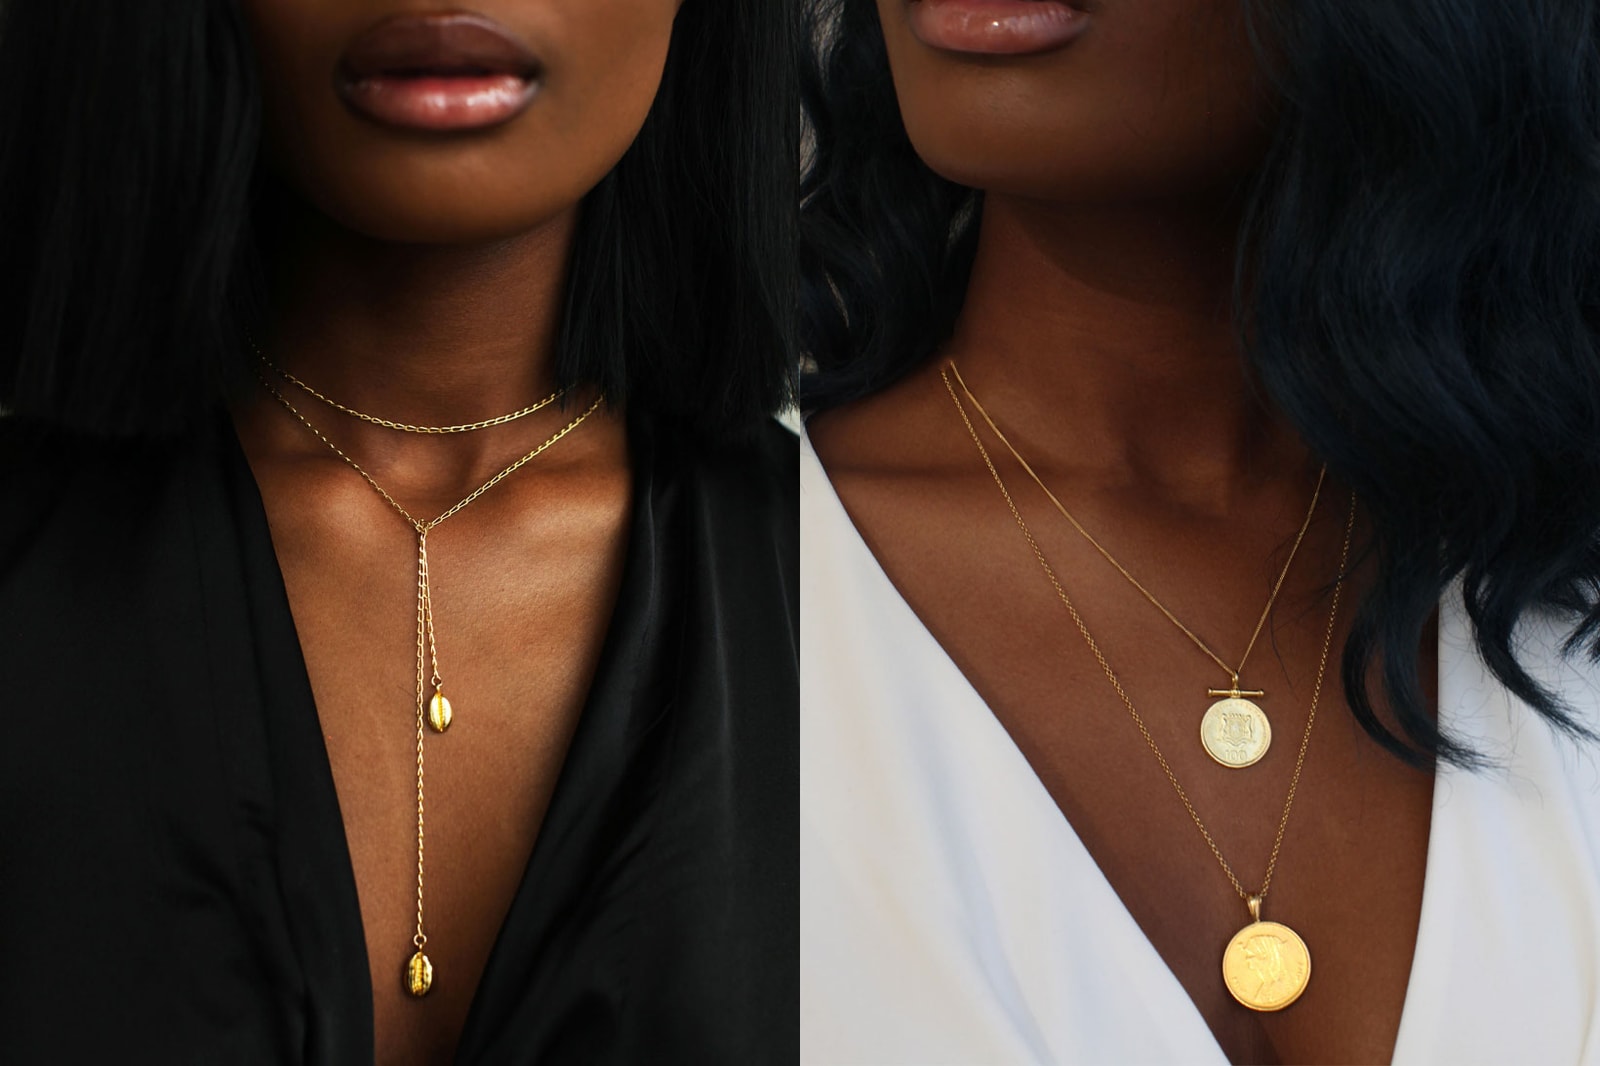 Black Owned Best Jewelry Brands Designers Mateo Third Crown SOKO